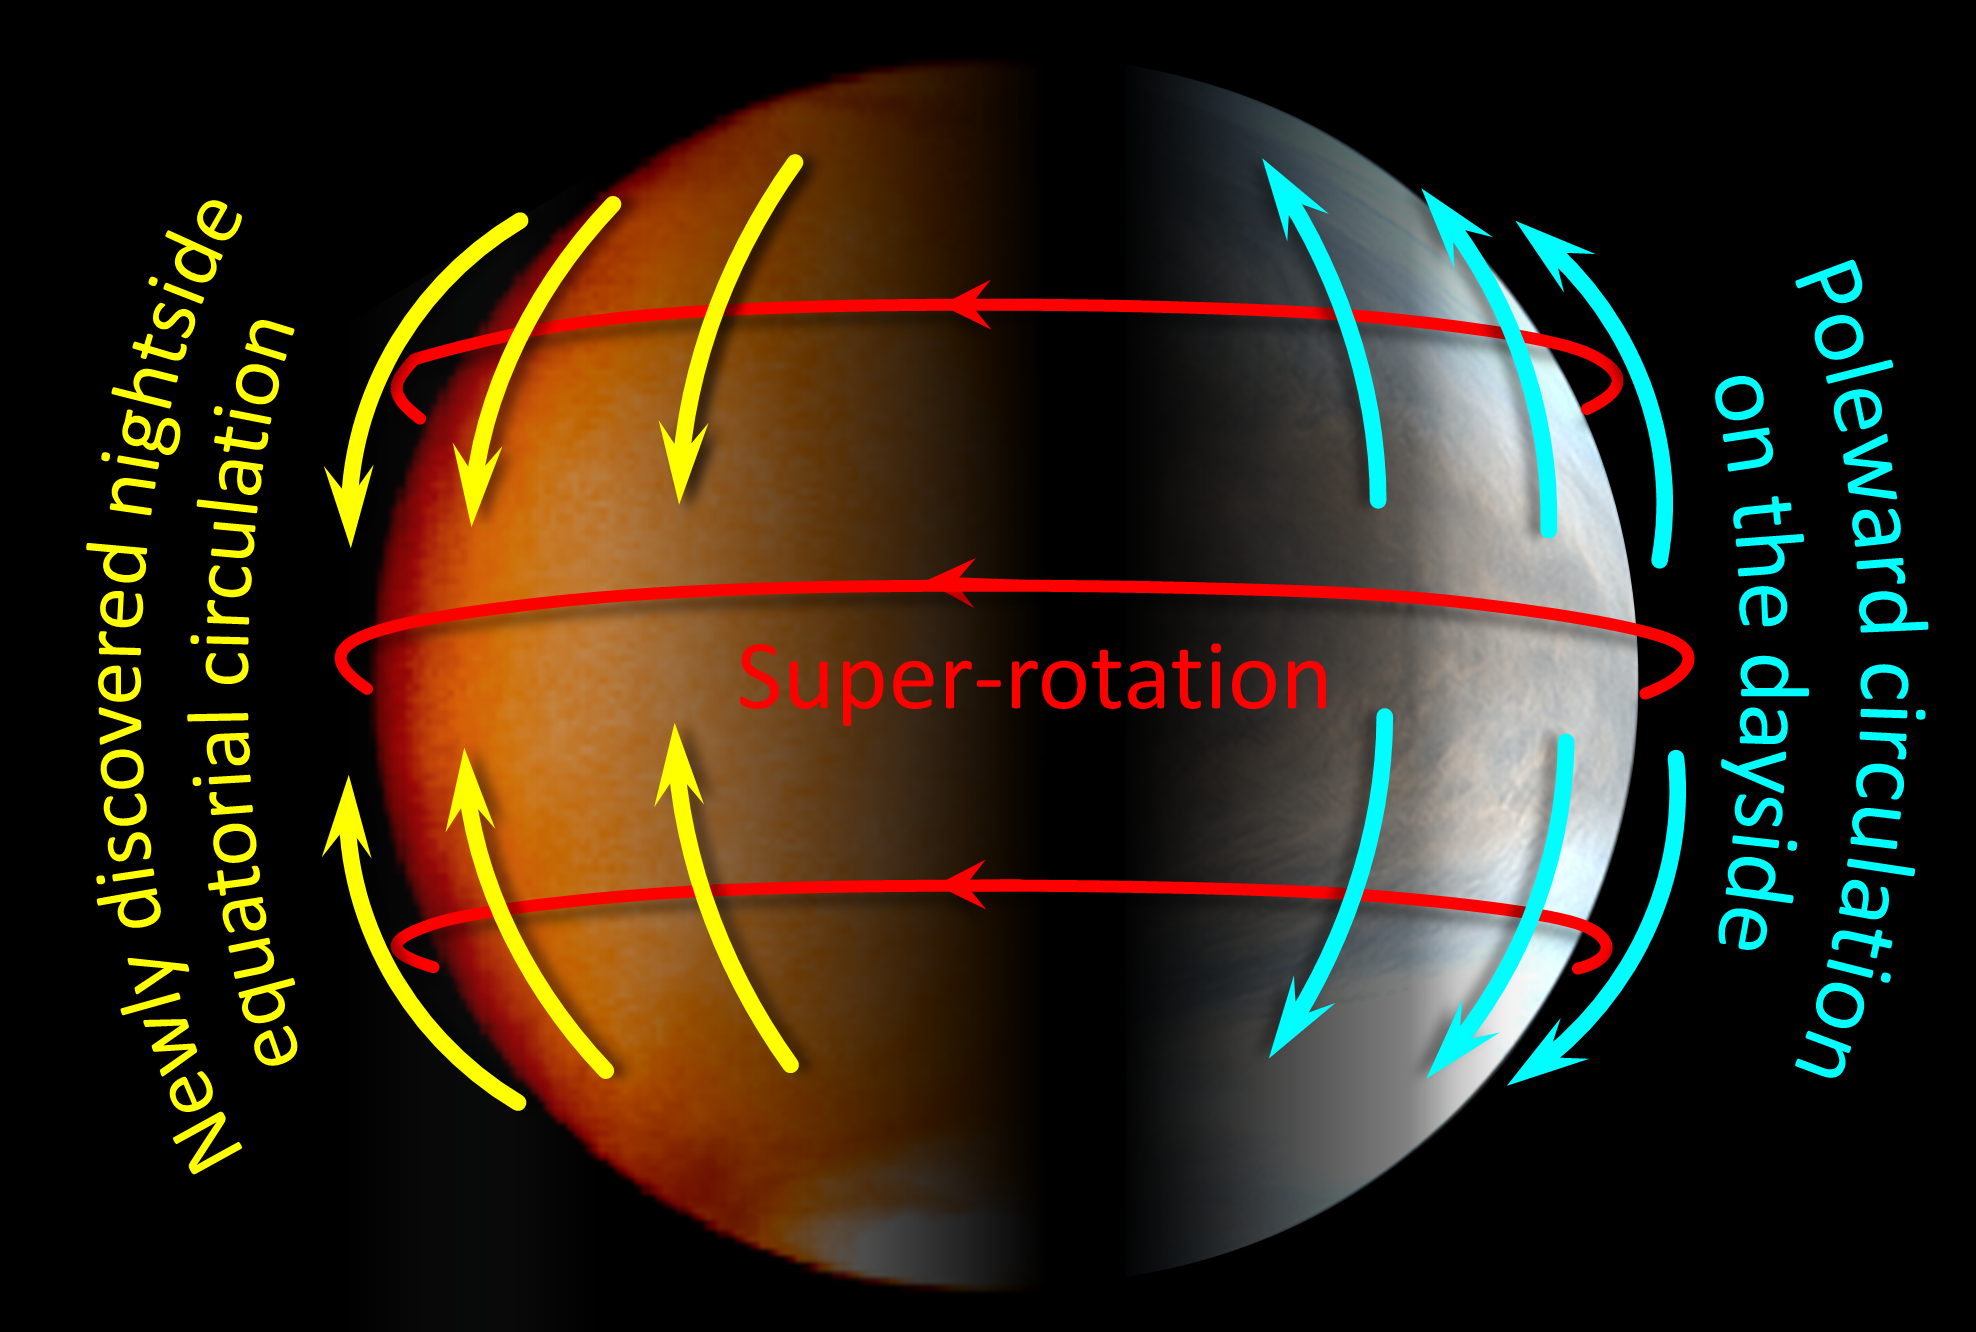 A black background. A brown sphere in the middle. Colored arrows surround and cross the sphere.